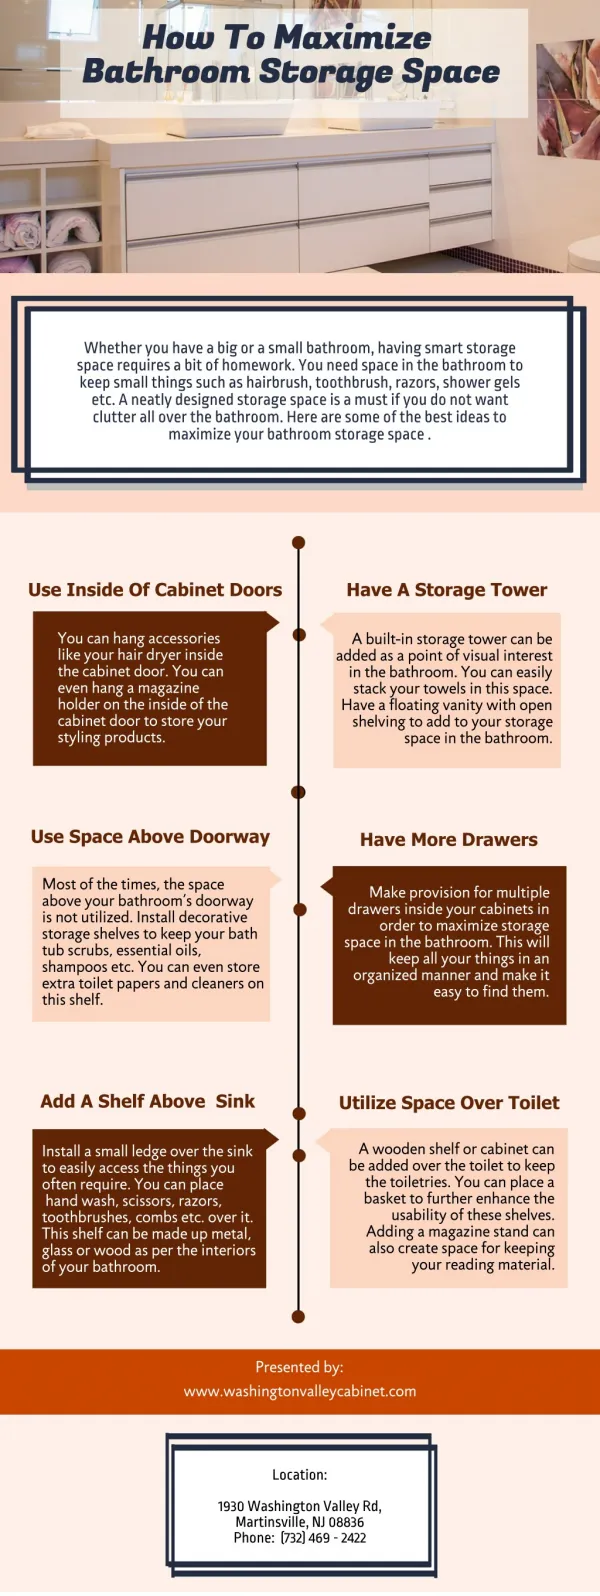 How To Maximize Bathroom Storage Space